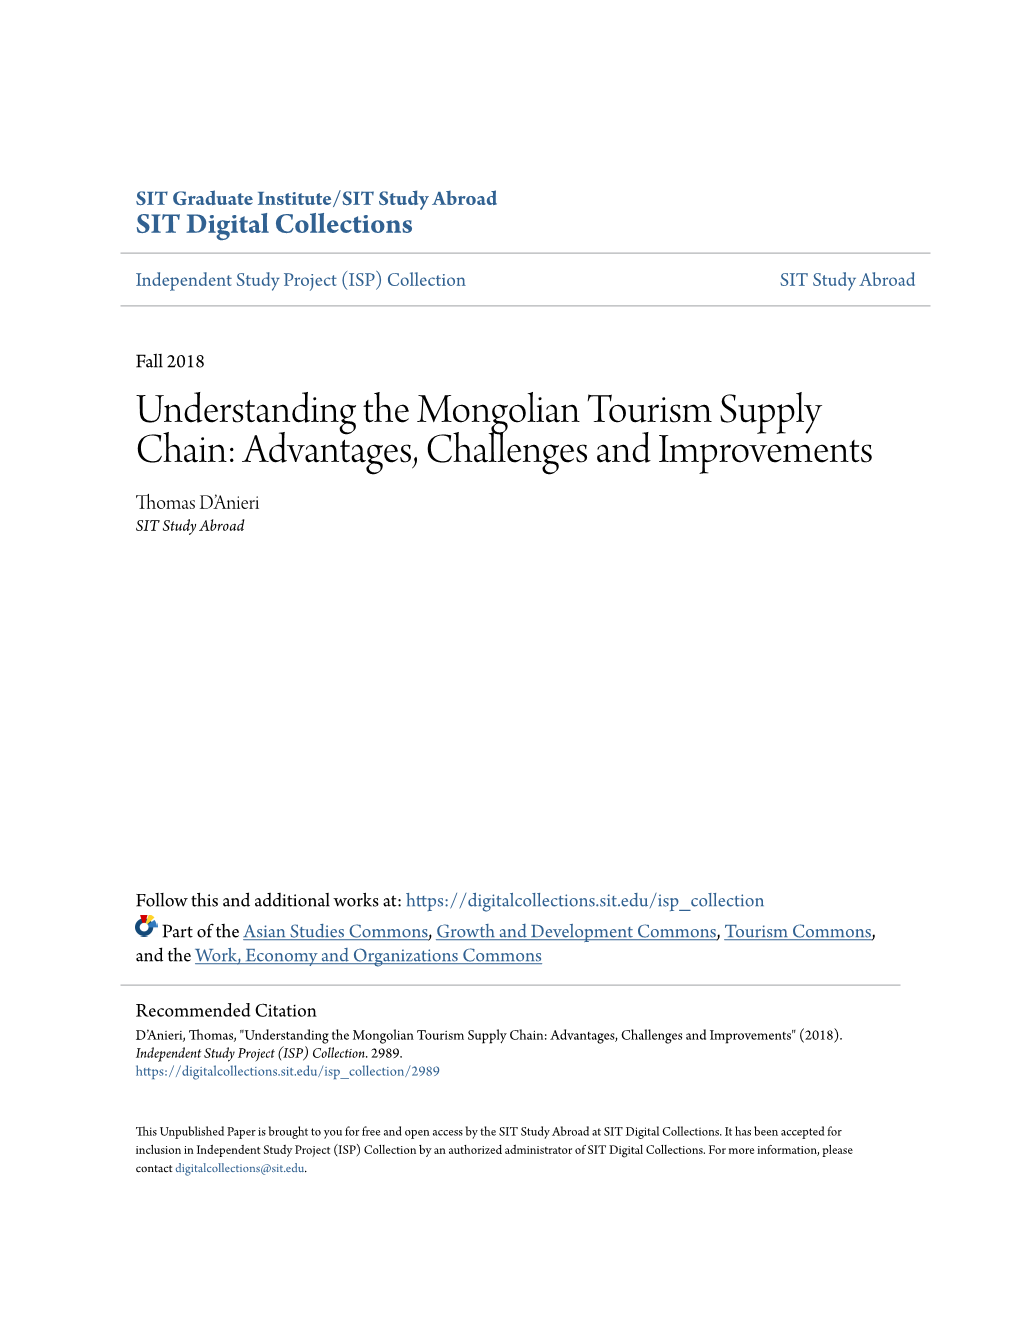 Understanding the Mongolian Tourism Supply Chain: Advantages, Challenges and Improvements Thomas D’Anieri SIT Study Abroad